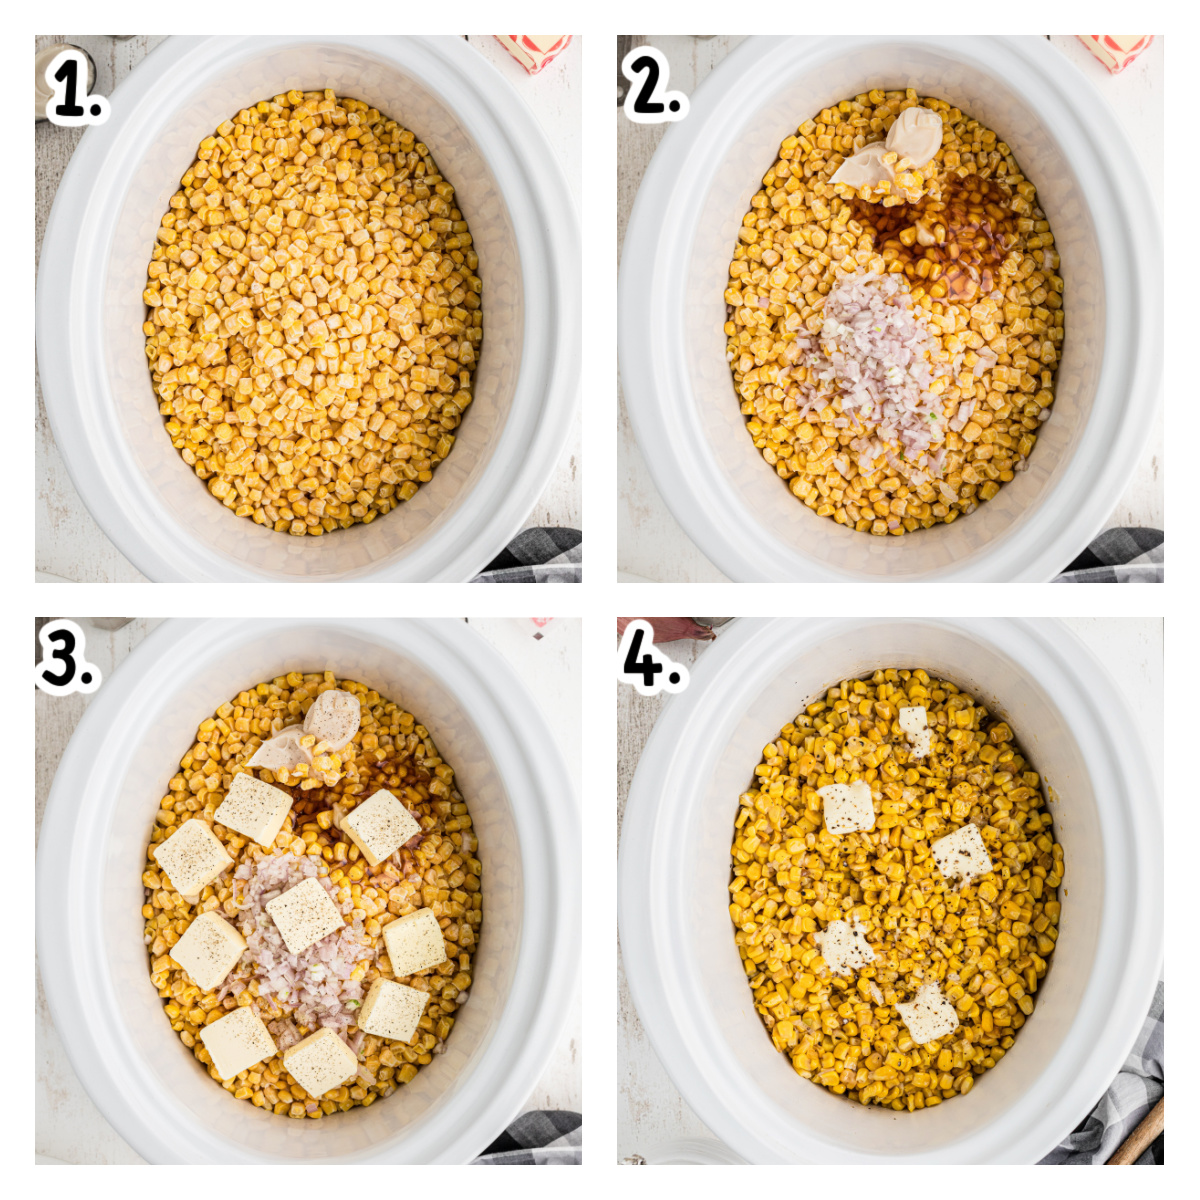 Four images showing how to make fried style corn in a slow cooker.